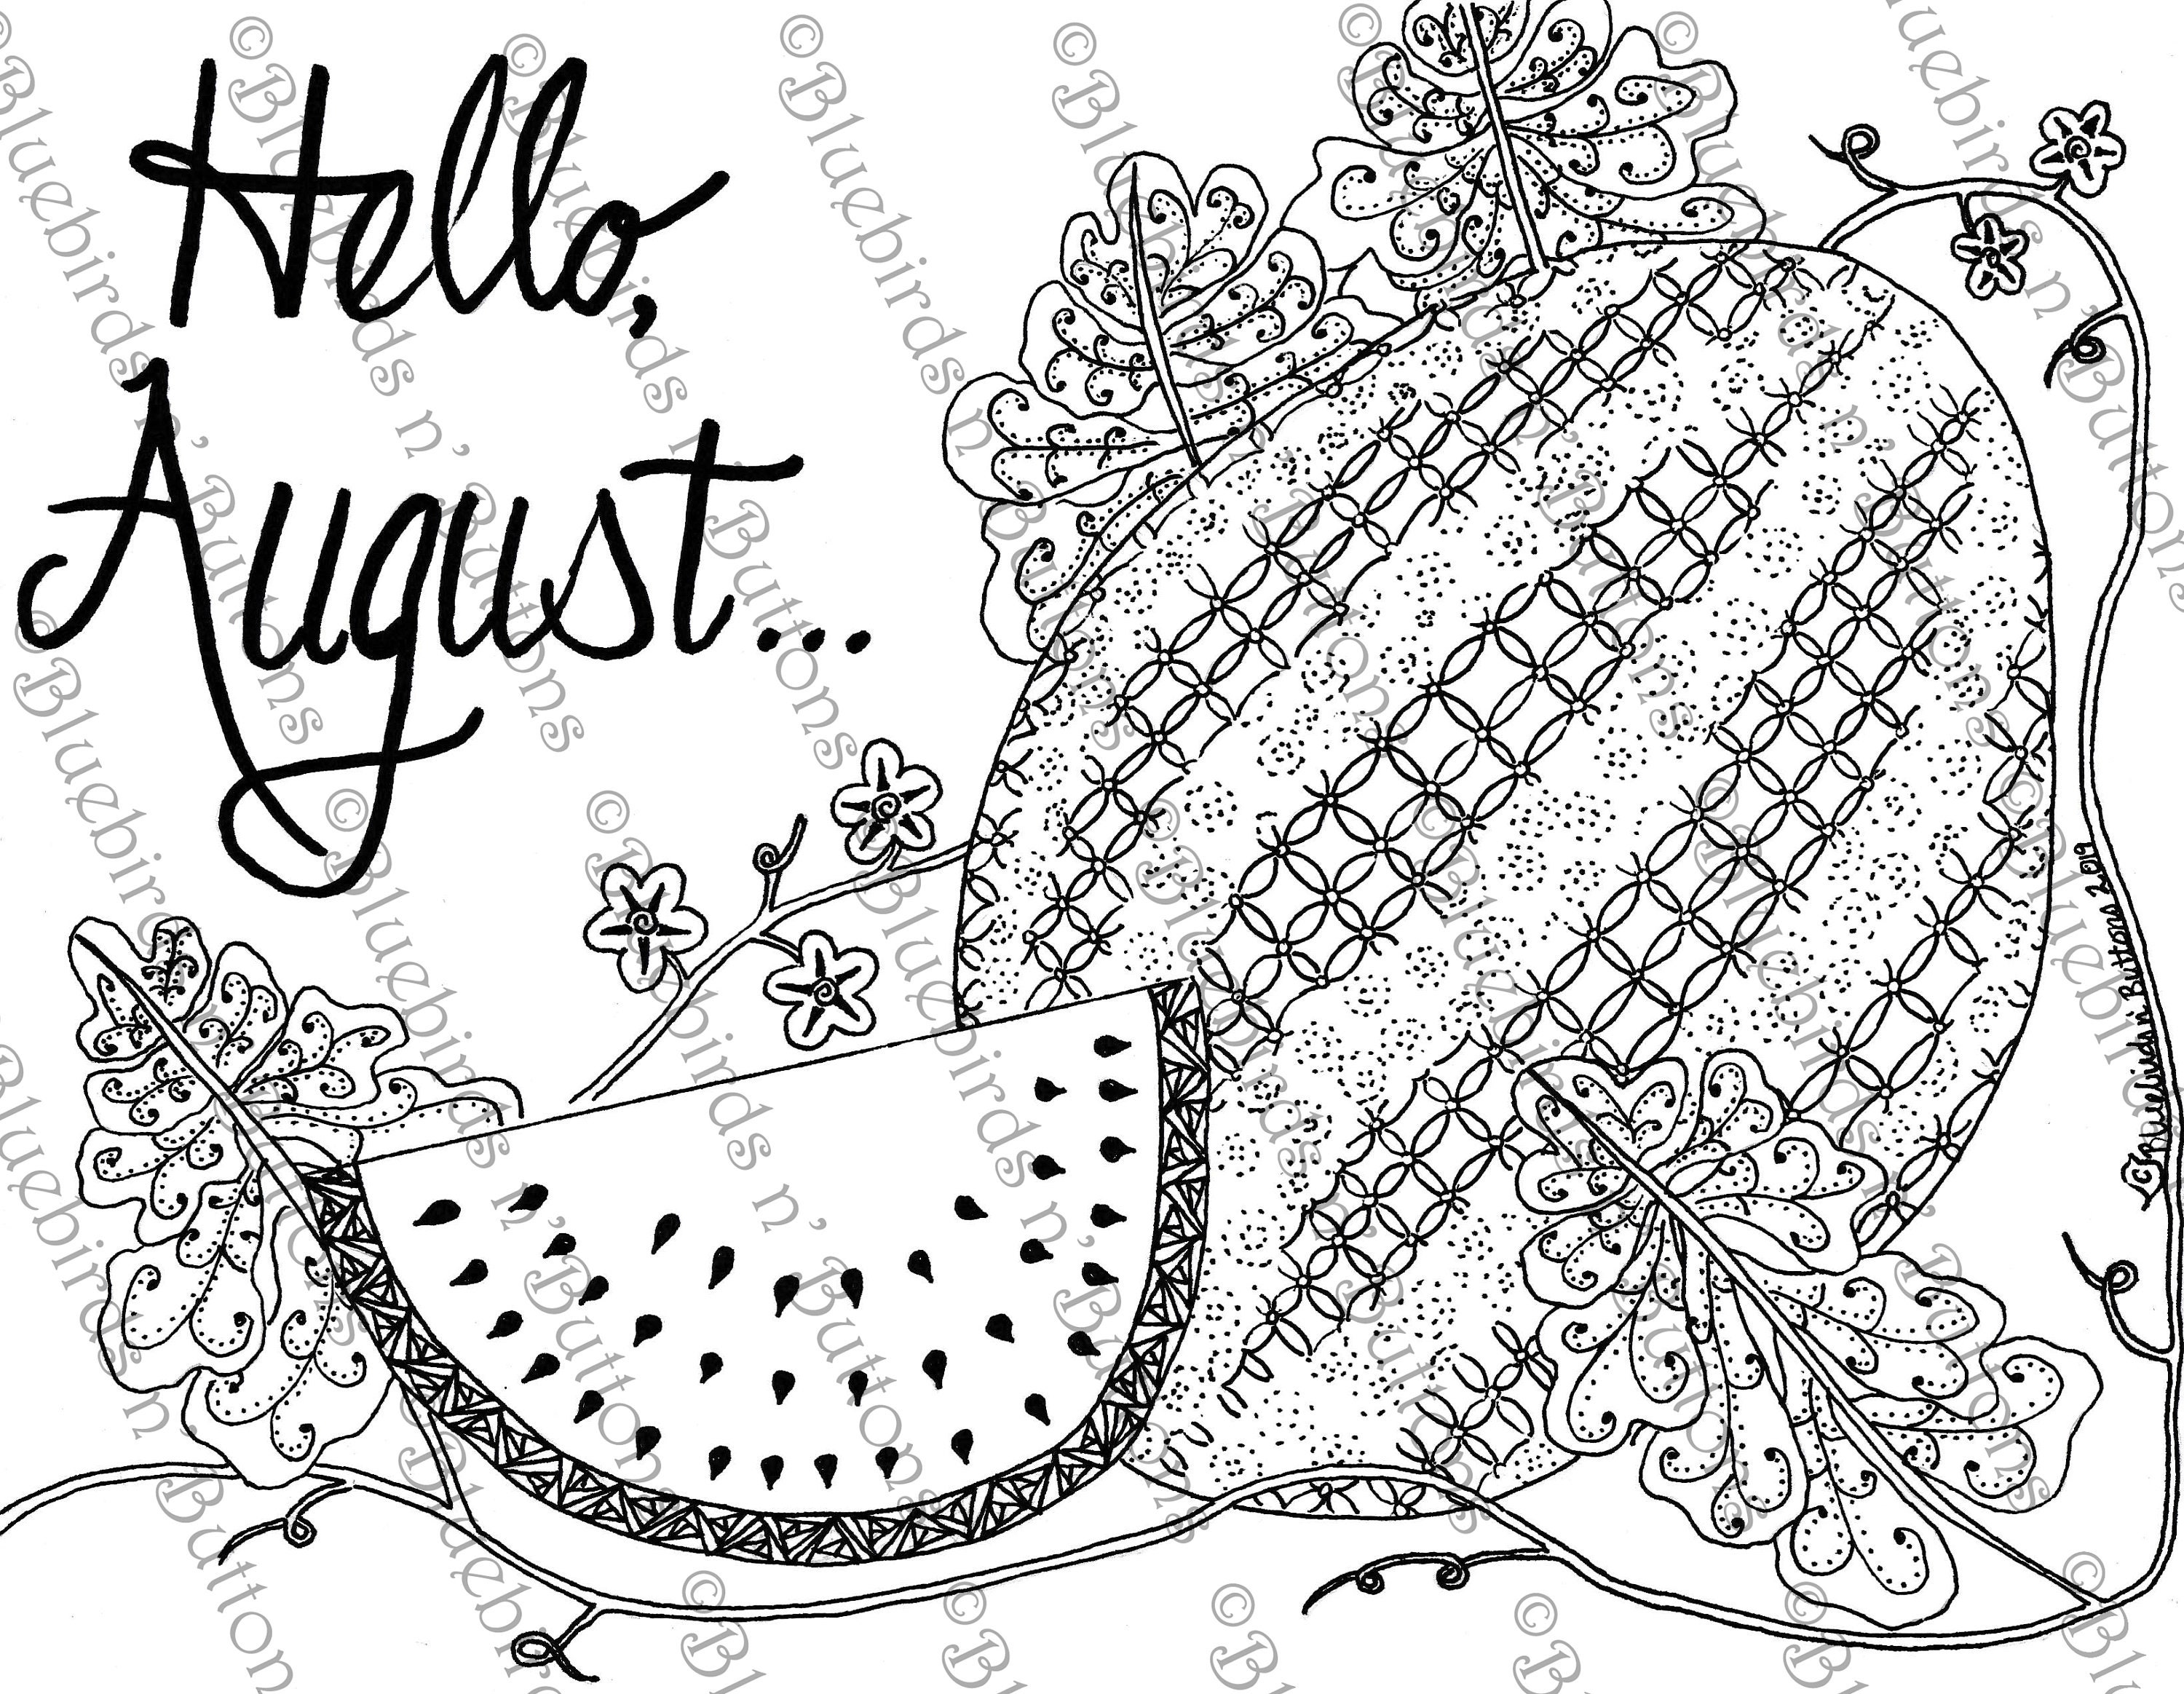 Coloring page printable coloring page august coloring watermelon coloring page download adult coloring page kids coloring pages